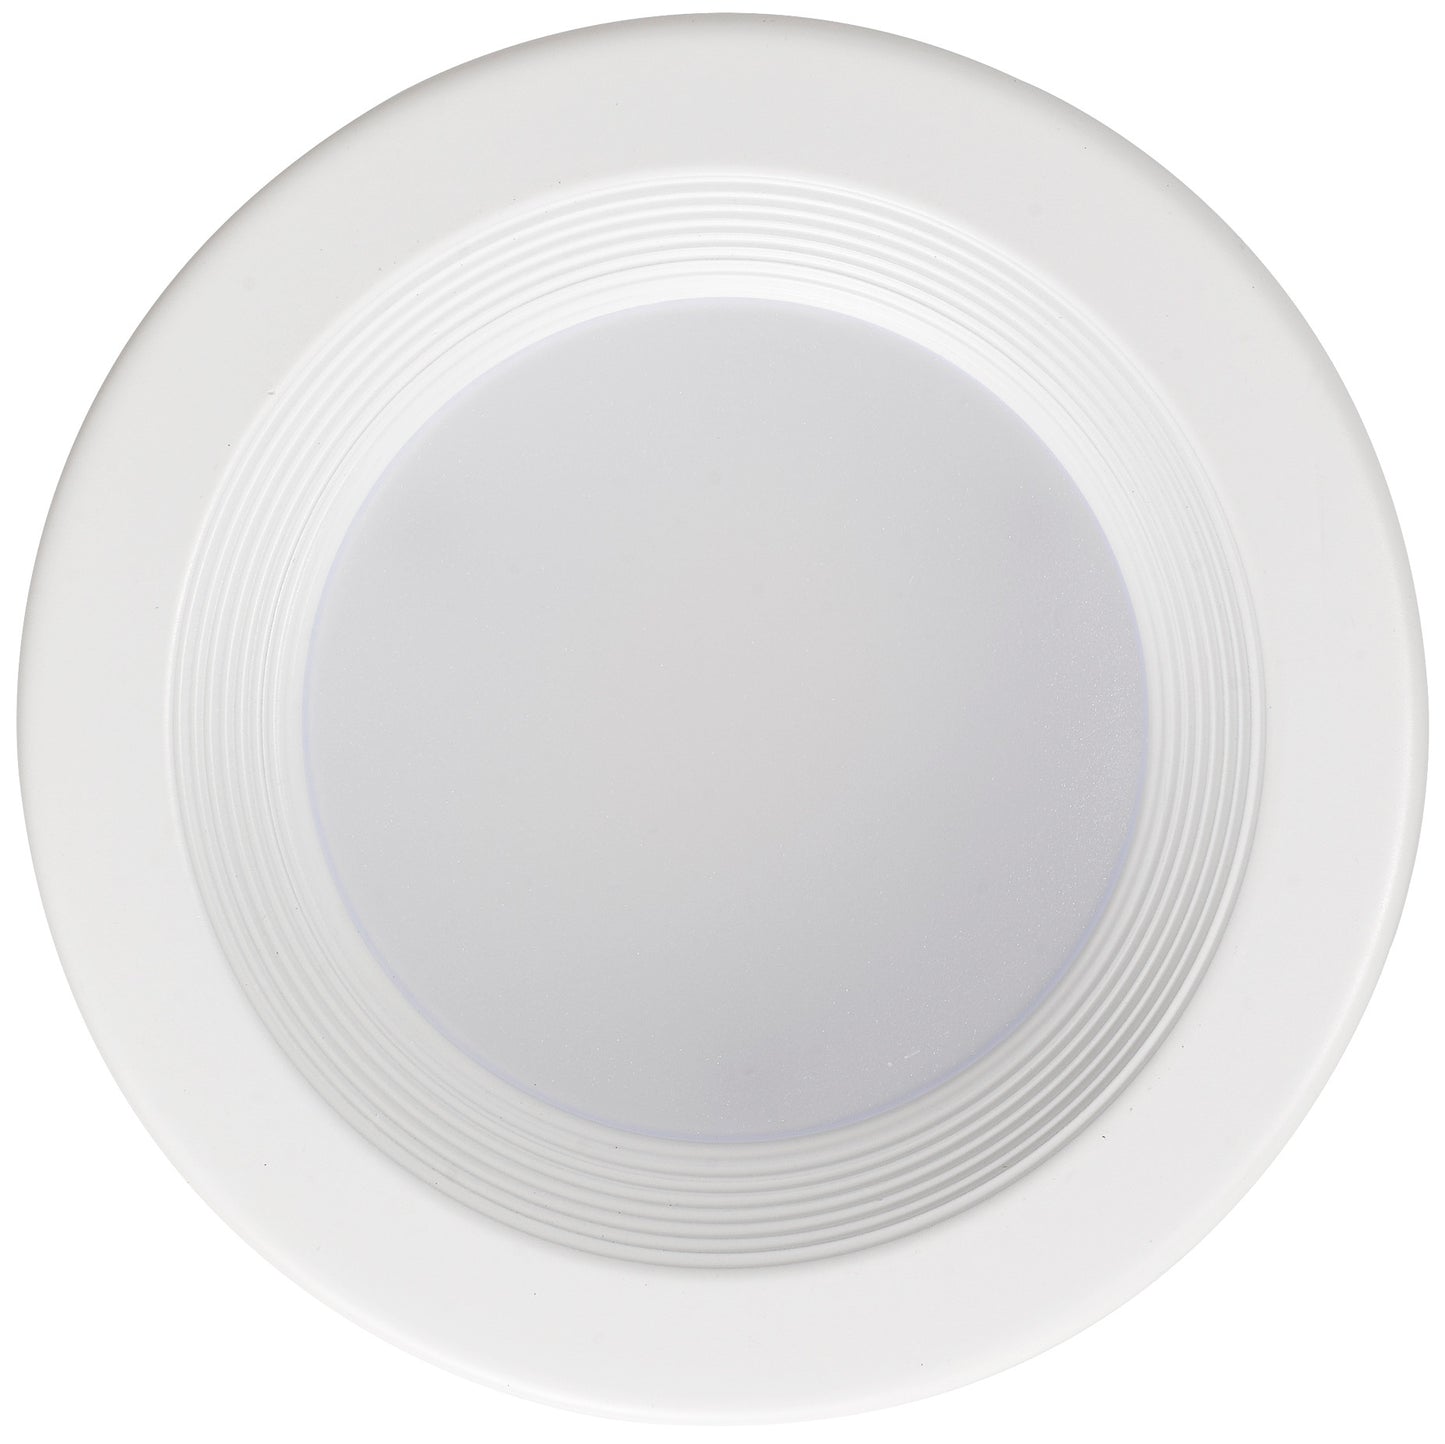 Luxrite LR23790 4 Inch LED Baffle Trim Recessed Can Lights, Color Selectable, Dimmable, 750 Lumens, Energy Star, Wet Rated